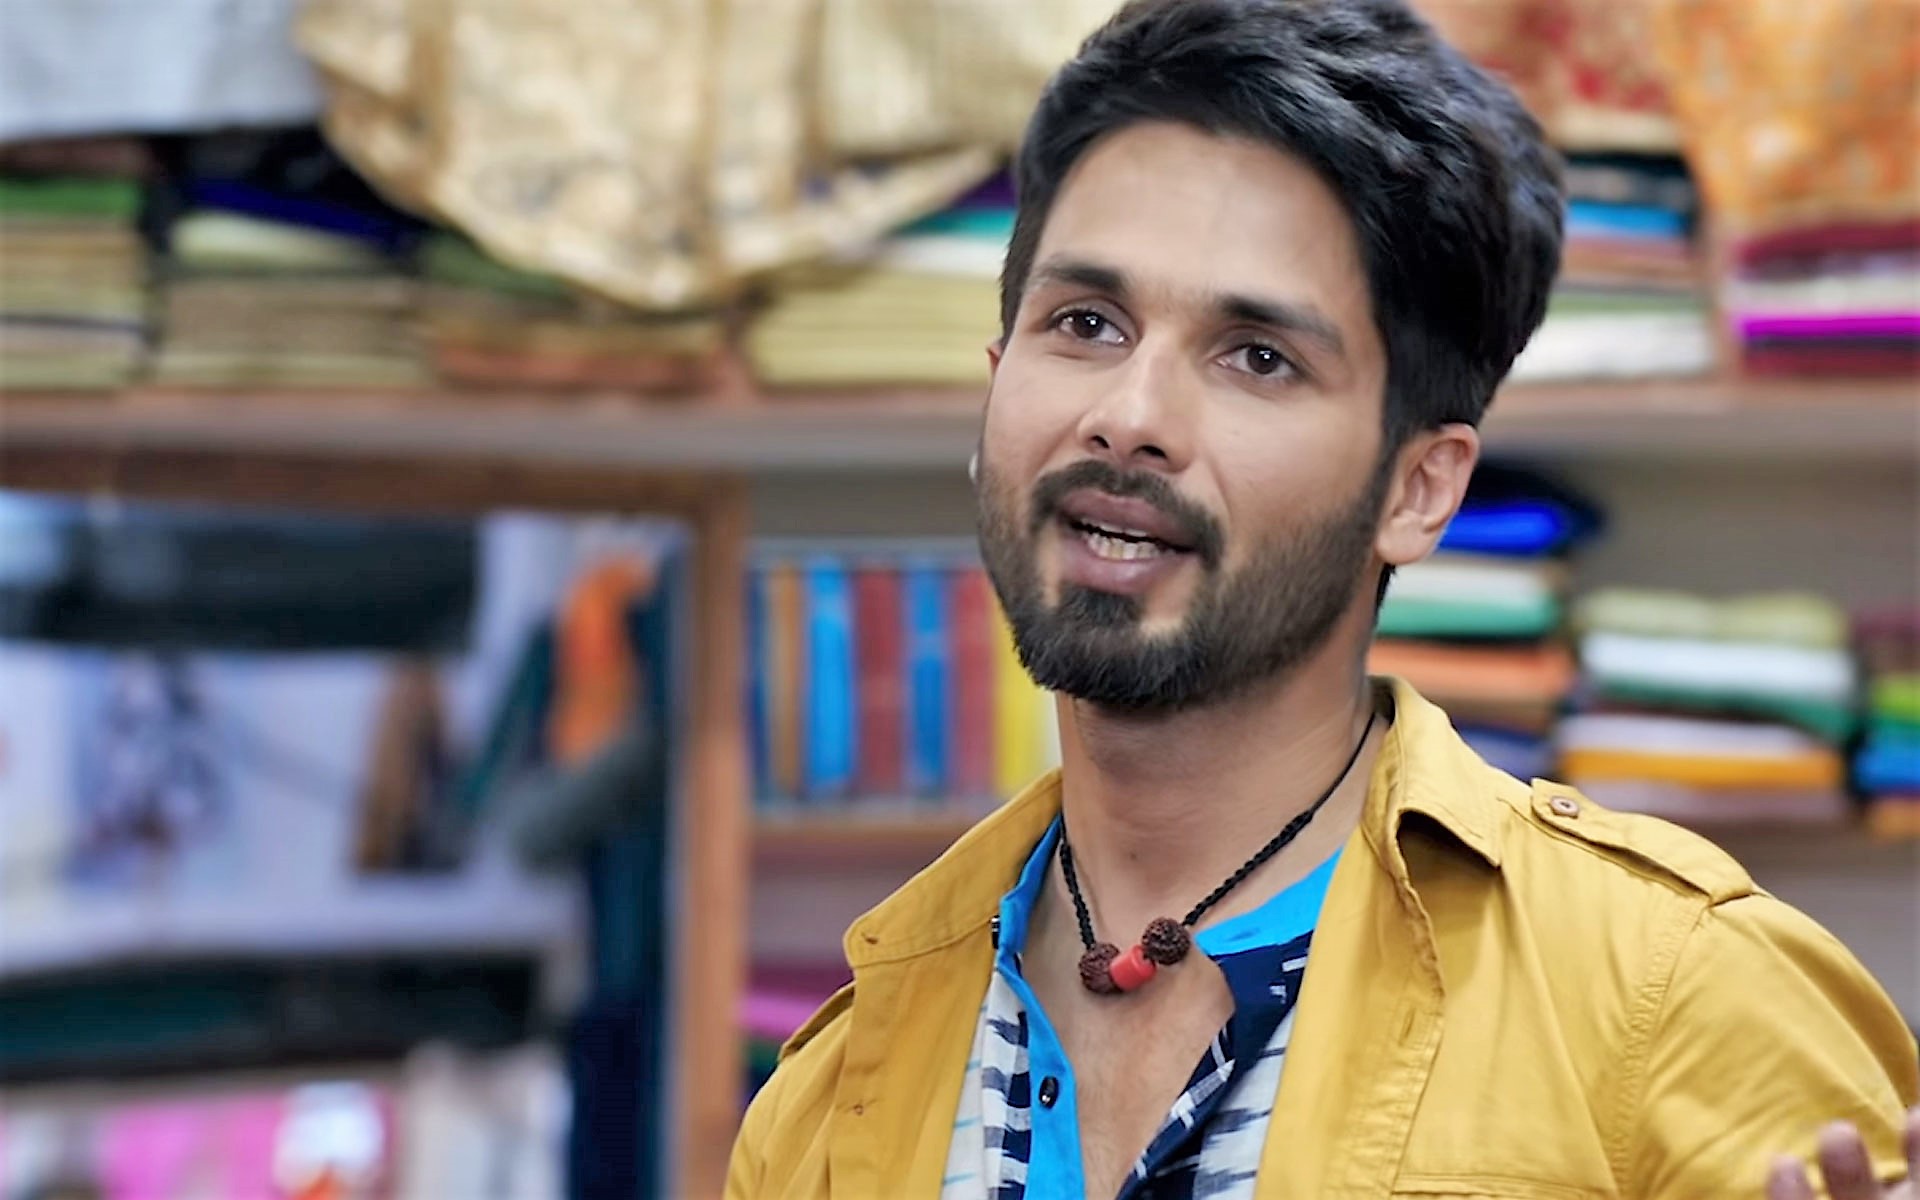 Batti Gul Meter Chalu Trailer Review: What's With Shahid Kapoor's Accent? -  Masala